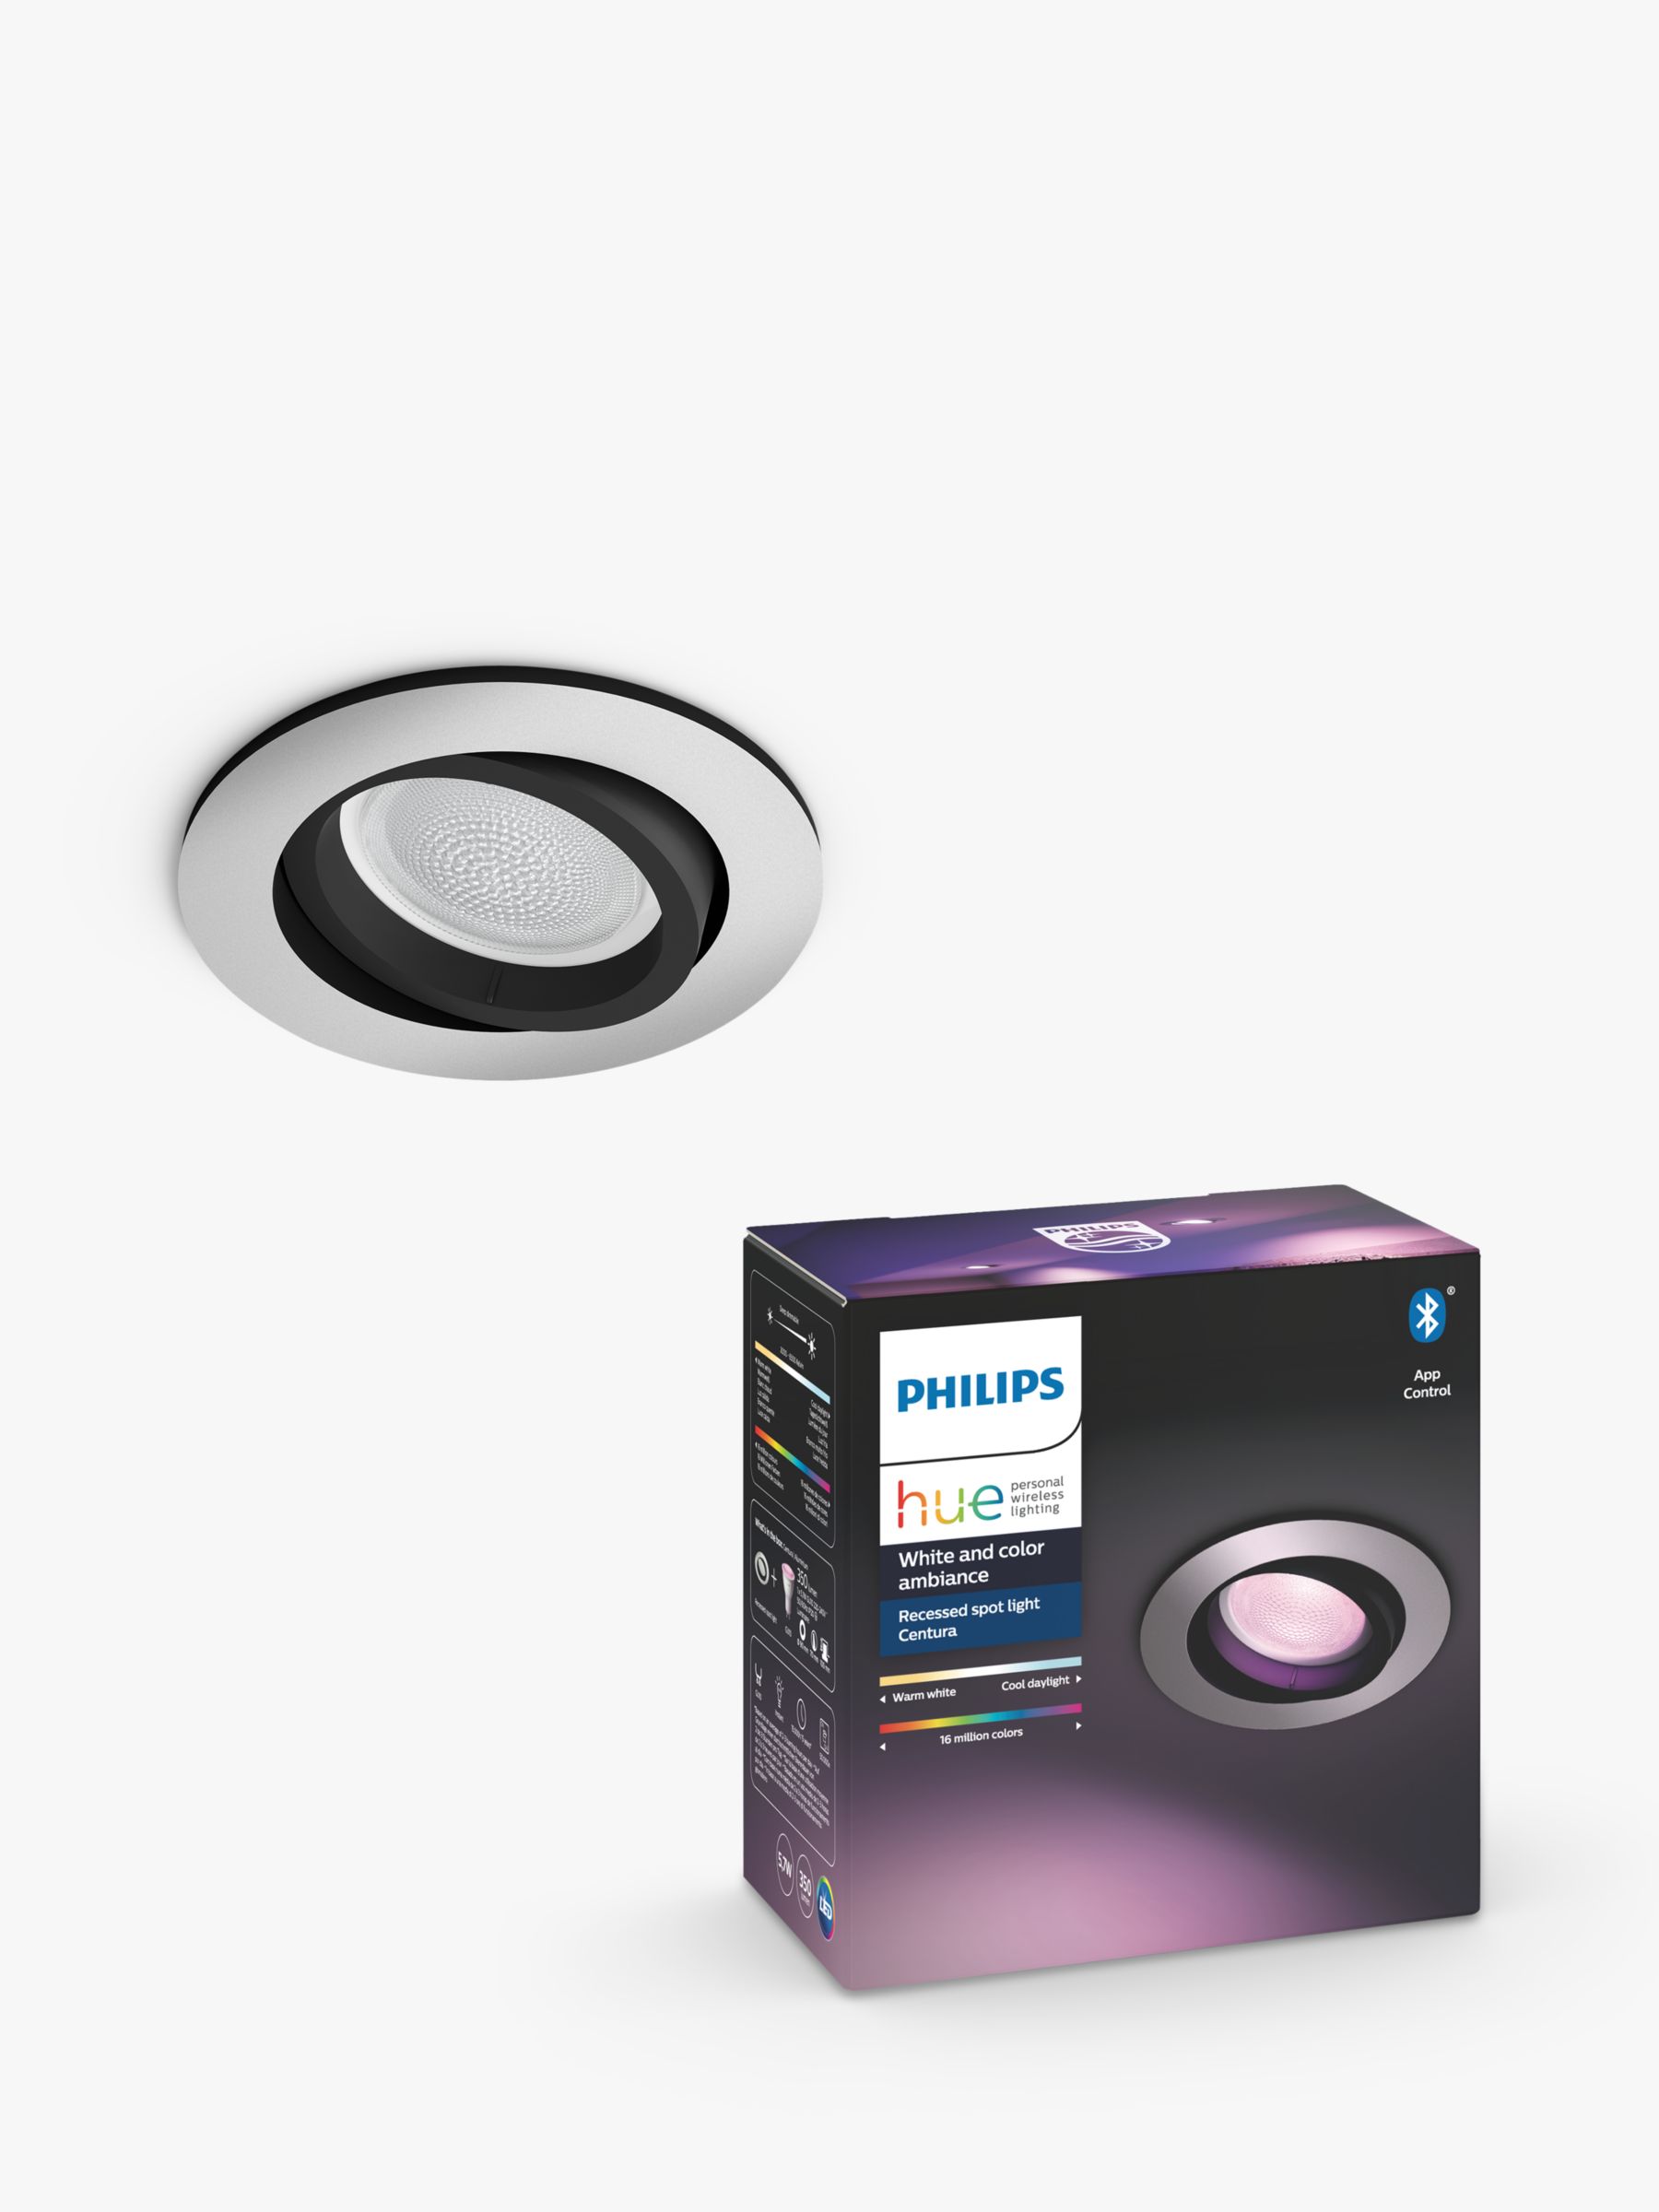 Bot Mose Turist Philips Hue White and Colour Ambiance Centura LED Smart Recessed Spotlight  with Bluetooth, Silver/Black